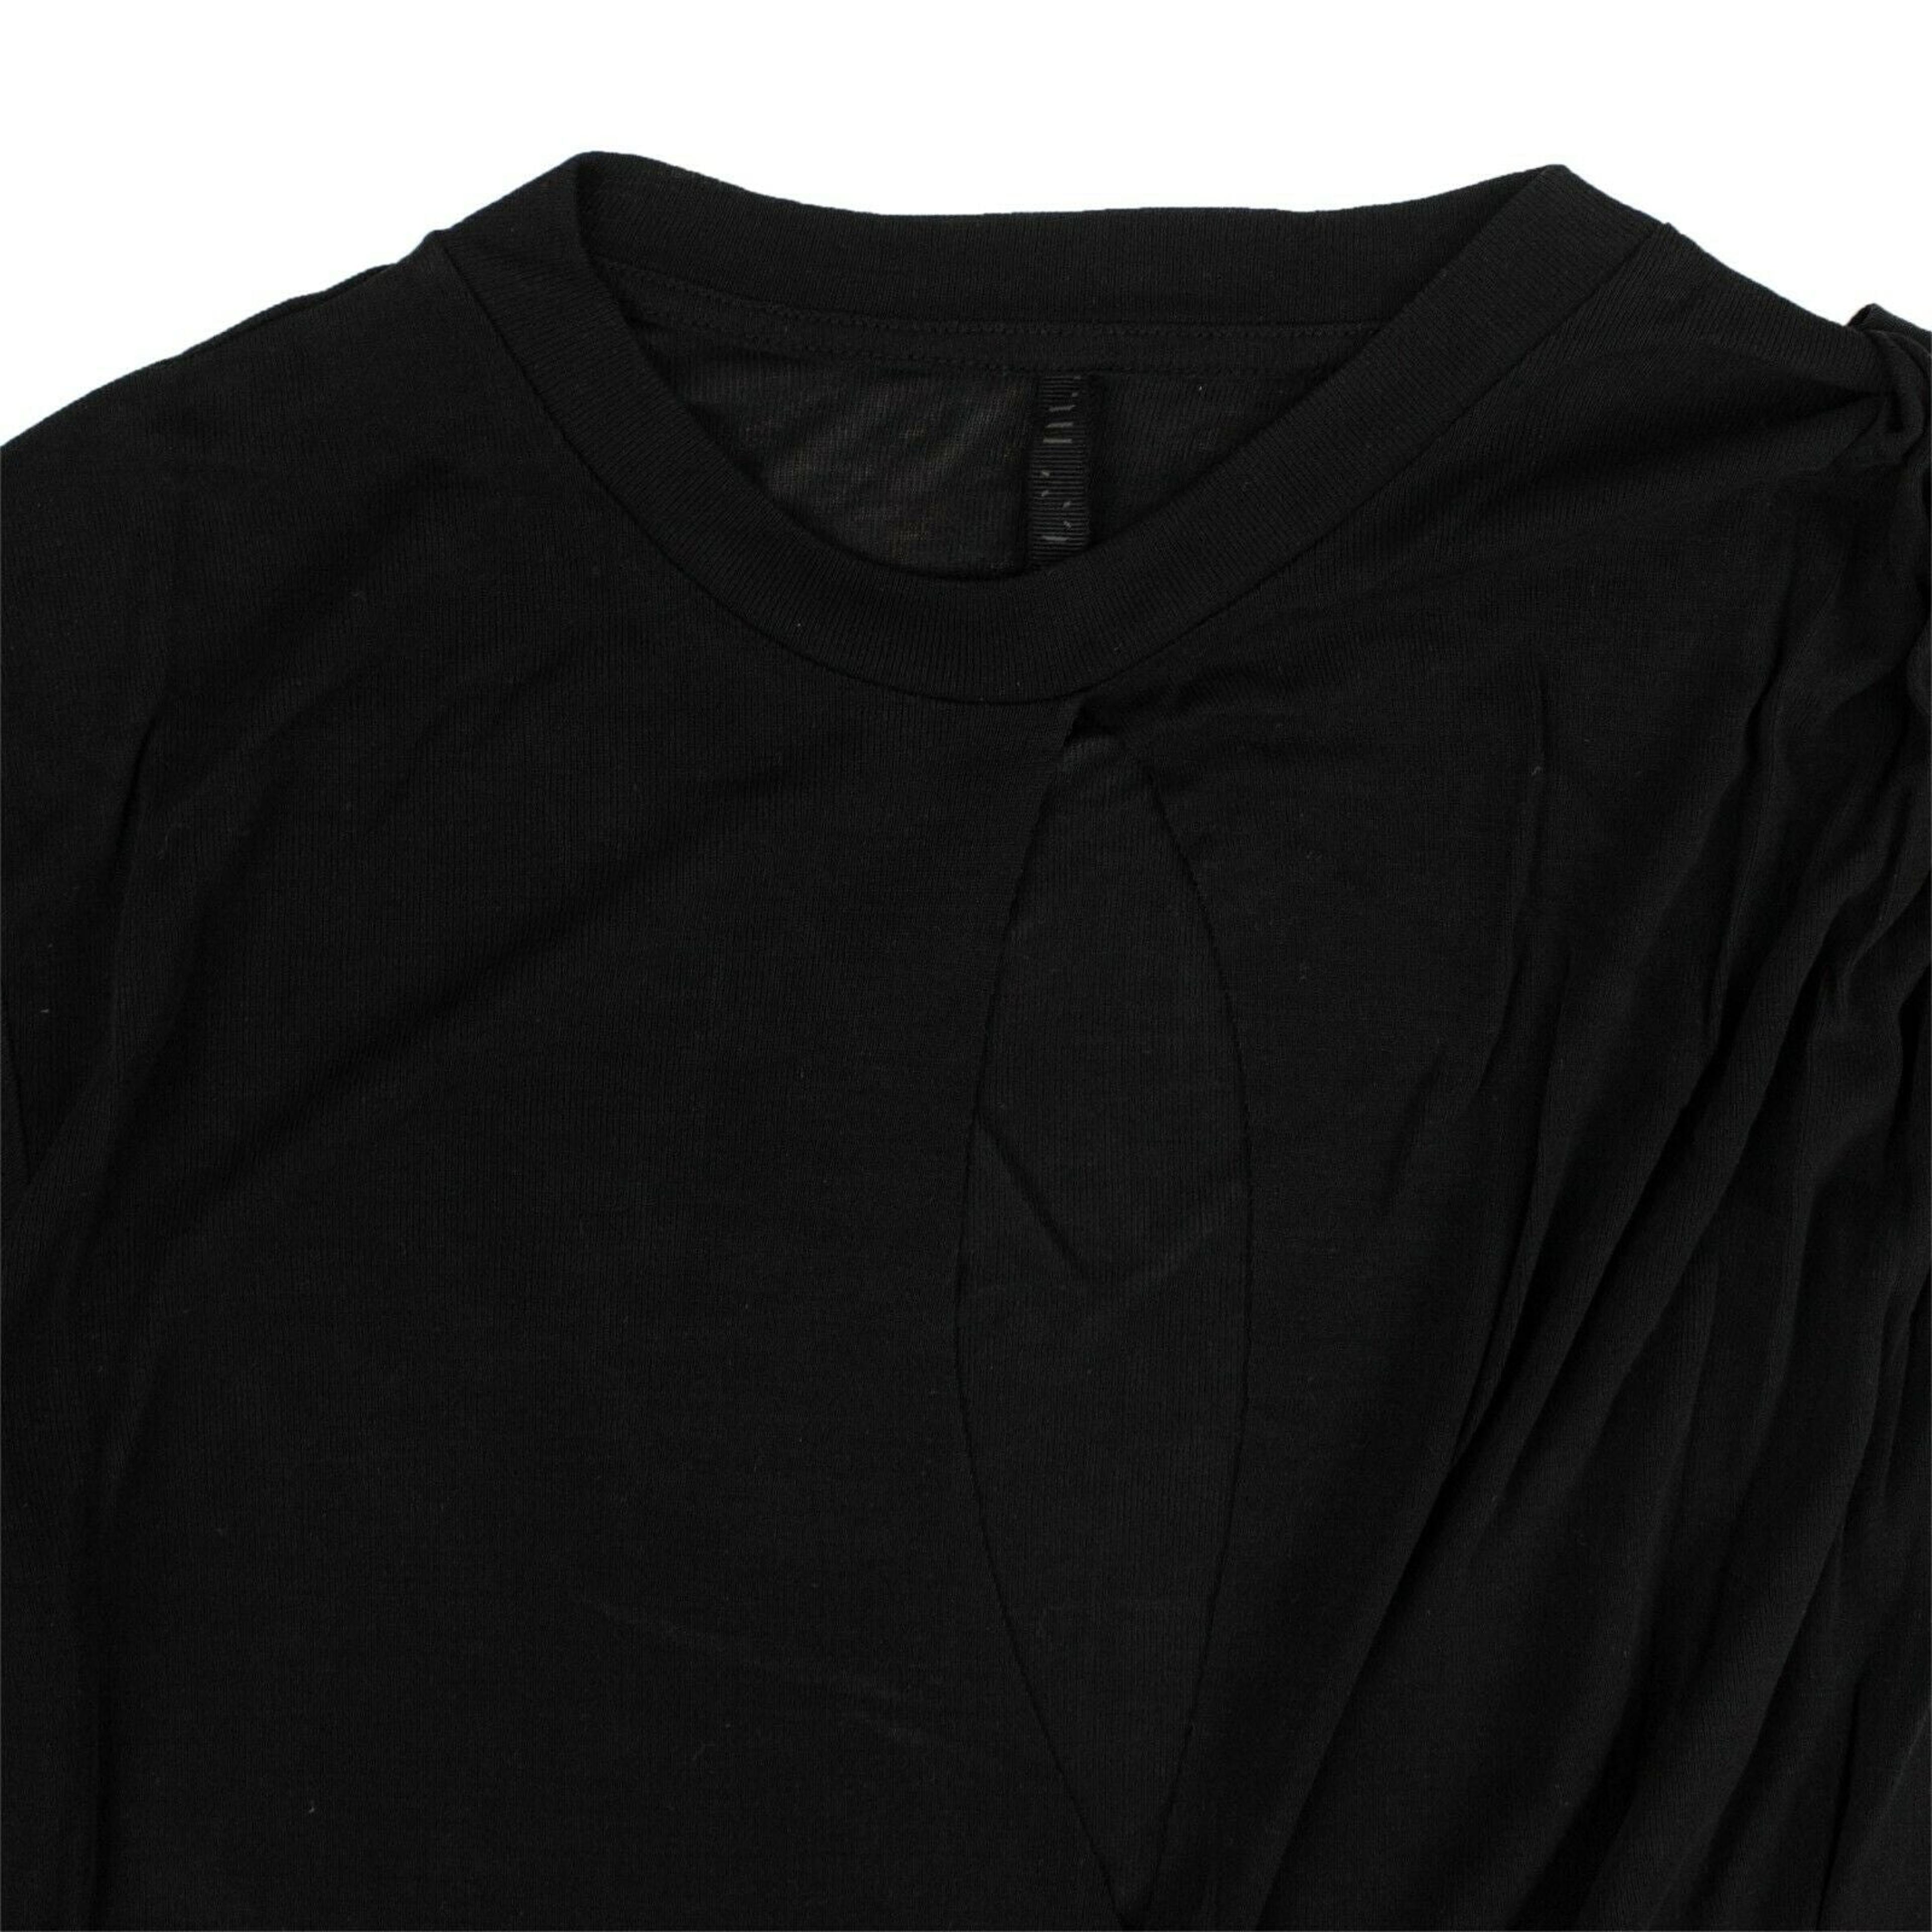 Alternate View 2 of Unravel Project Silk Draped T-Shirt - Black